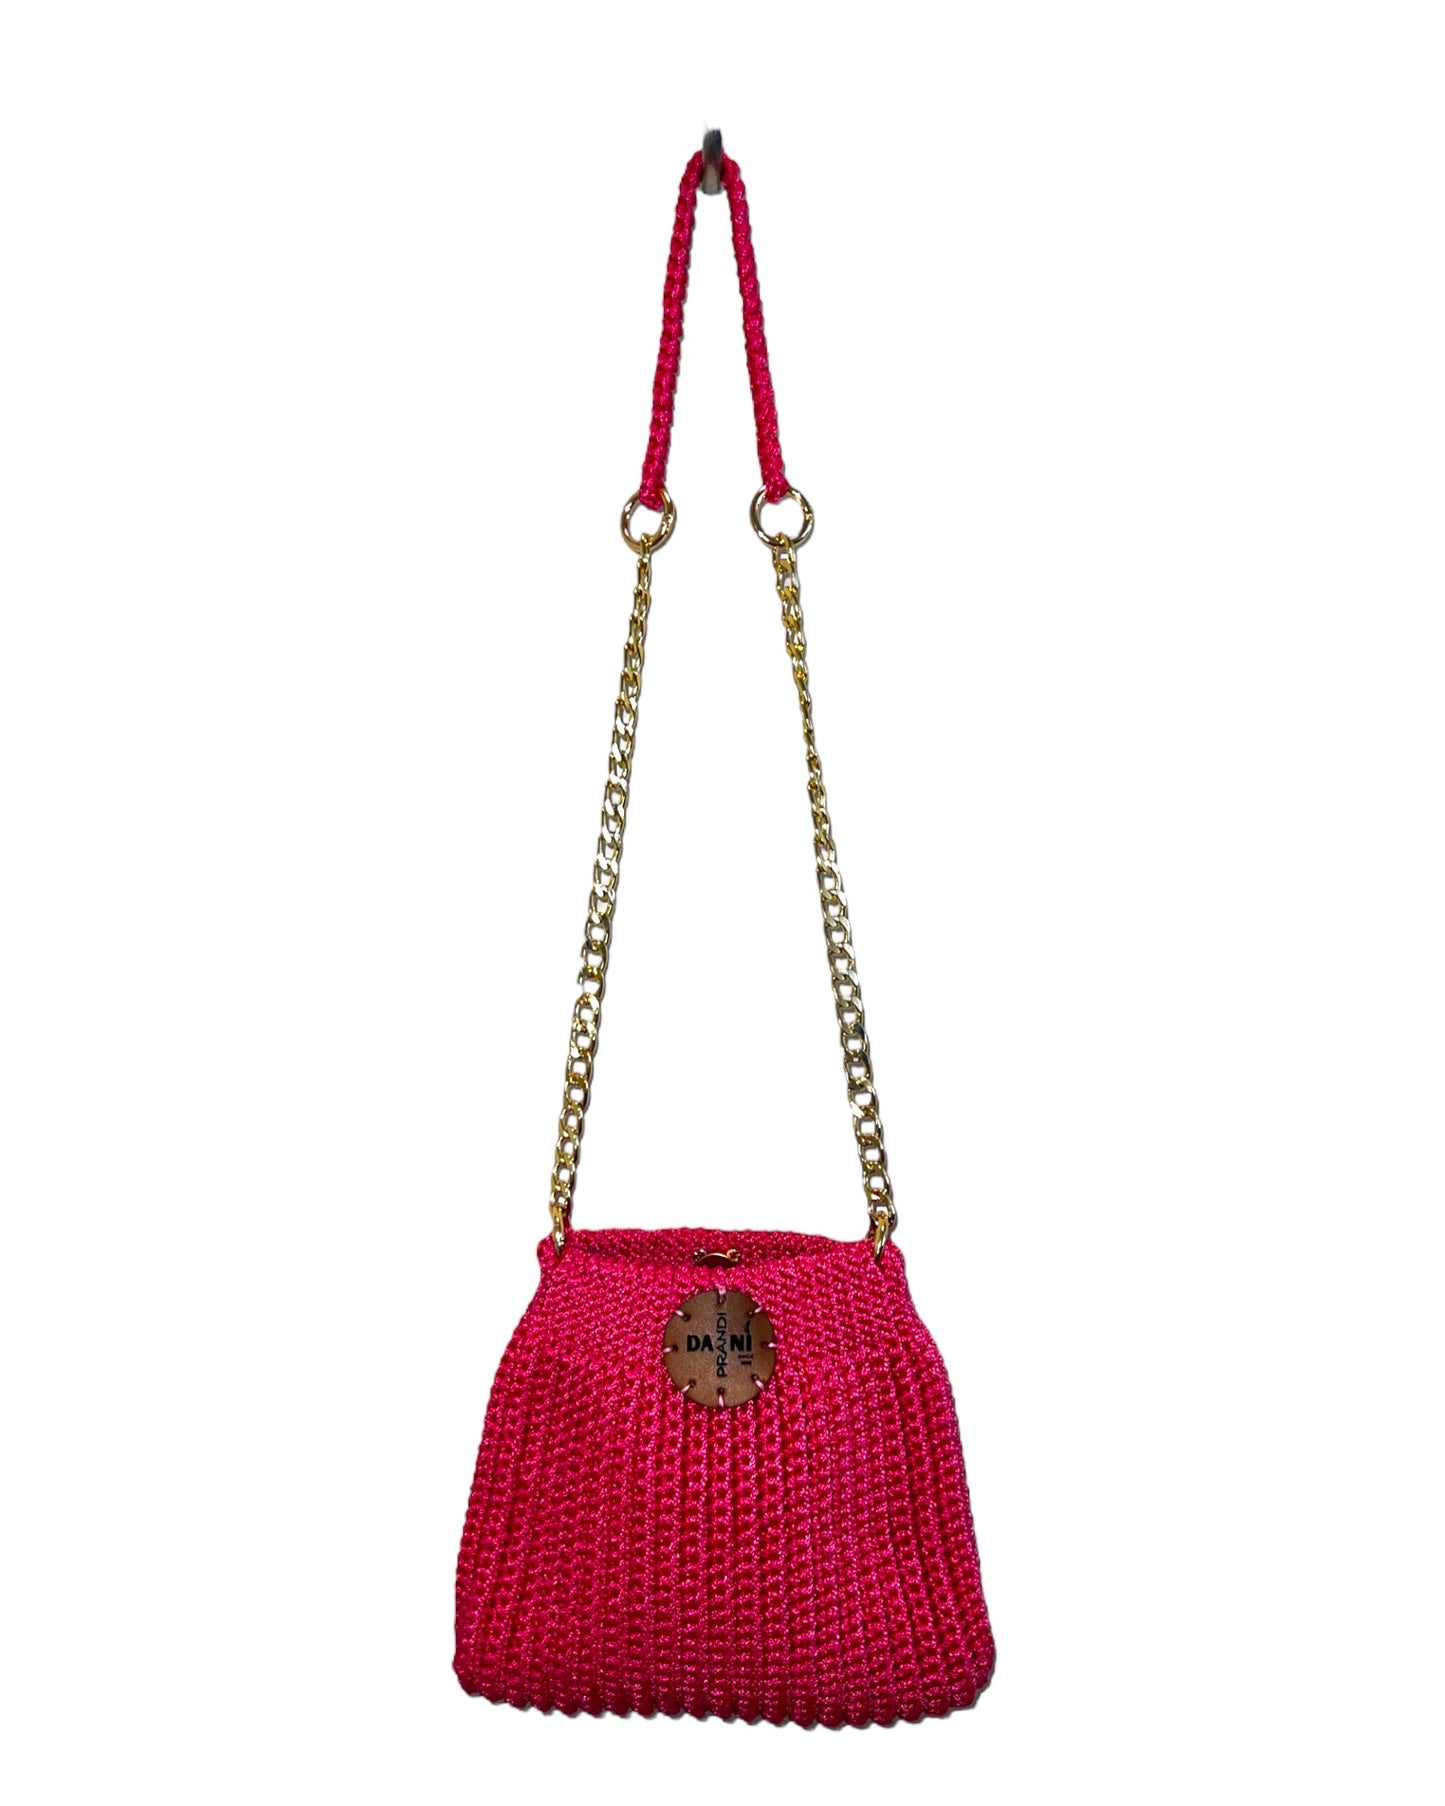 mini pouch-style embroidered crochet bag in a striking fuchsia color. The intricate embroidery adds artistic flair to the design, elevating it beyond a simple accessory. The golden metal chain provides a touch of chic versatility, allowing the bag to be worn effortlessly over the shoulder or crossbody. The upper part of the chain, crafted from the same fabric as the bag, ensures both elegance and comfort during wear.